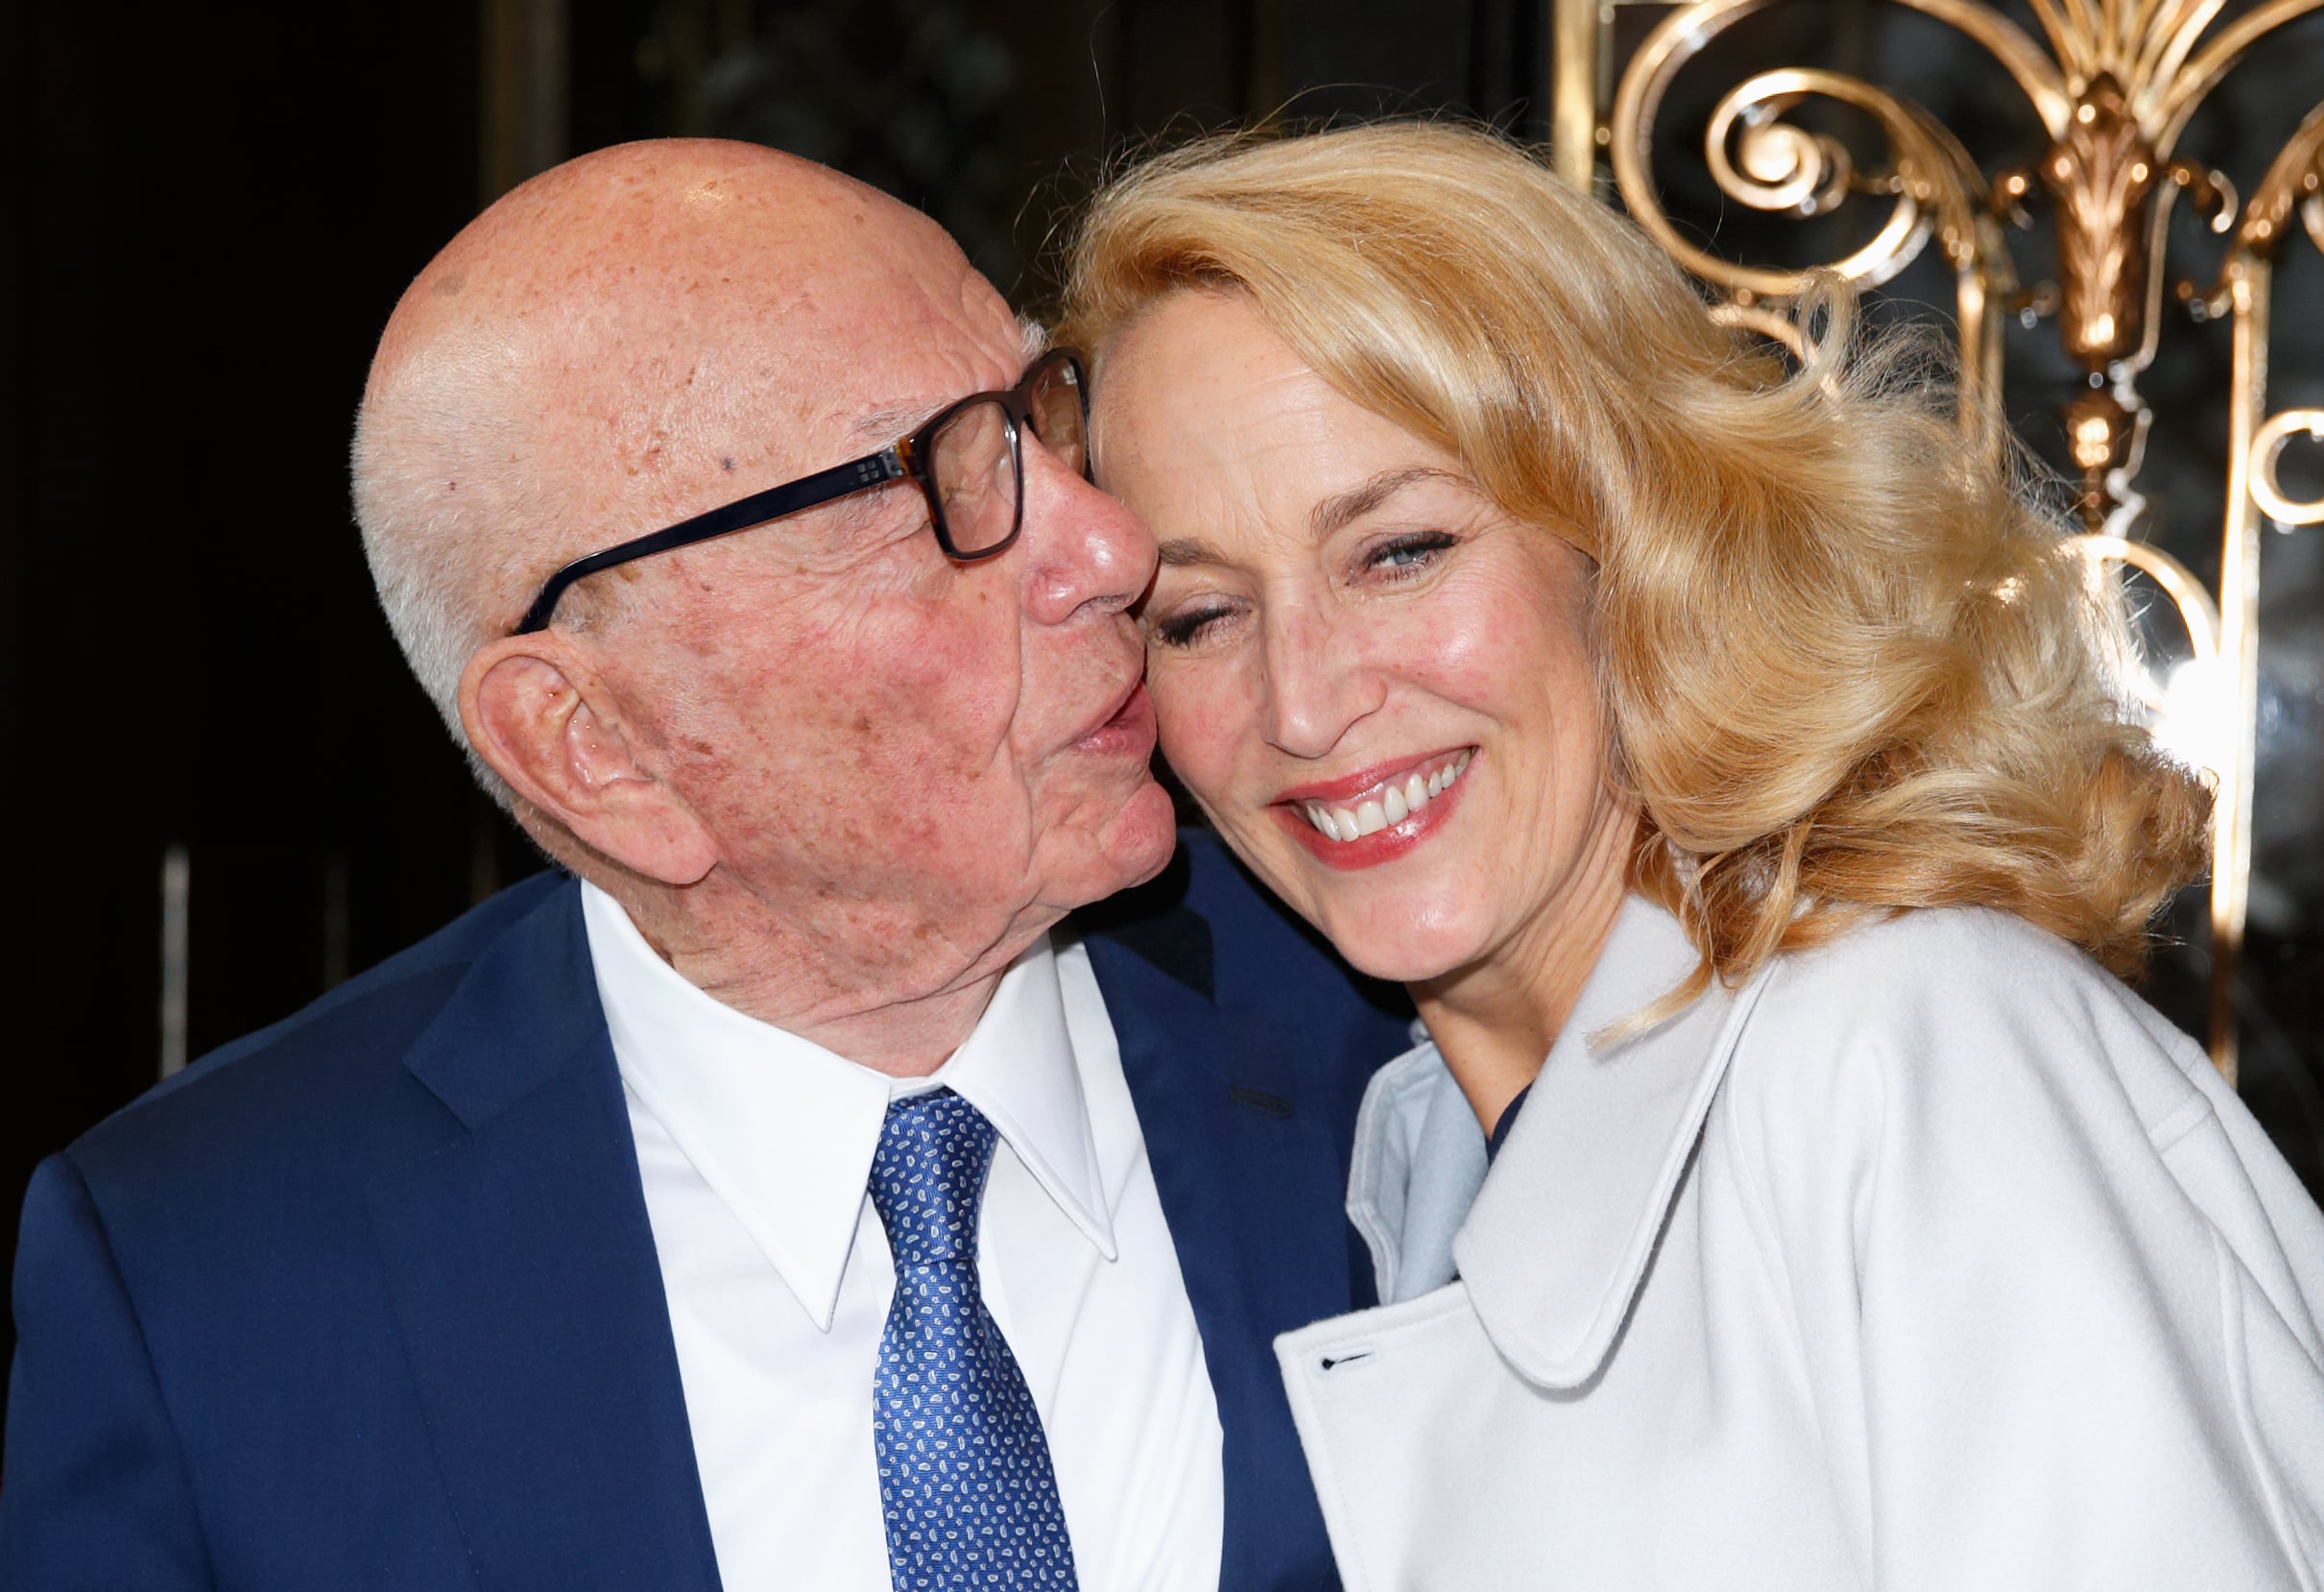 Stylewatch: Jerry Hall and Rupert Murdoch on their wedding day